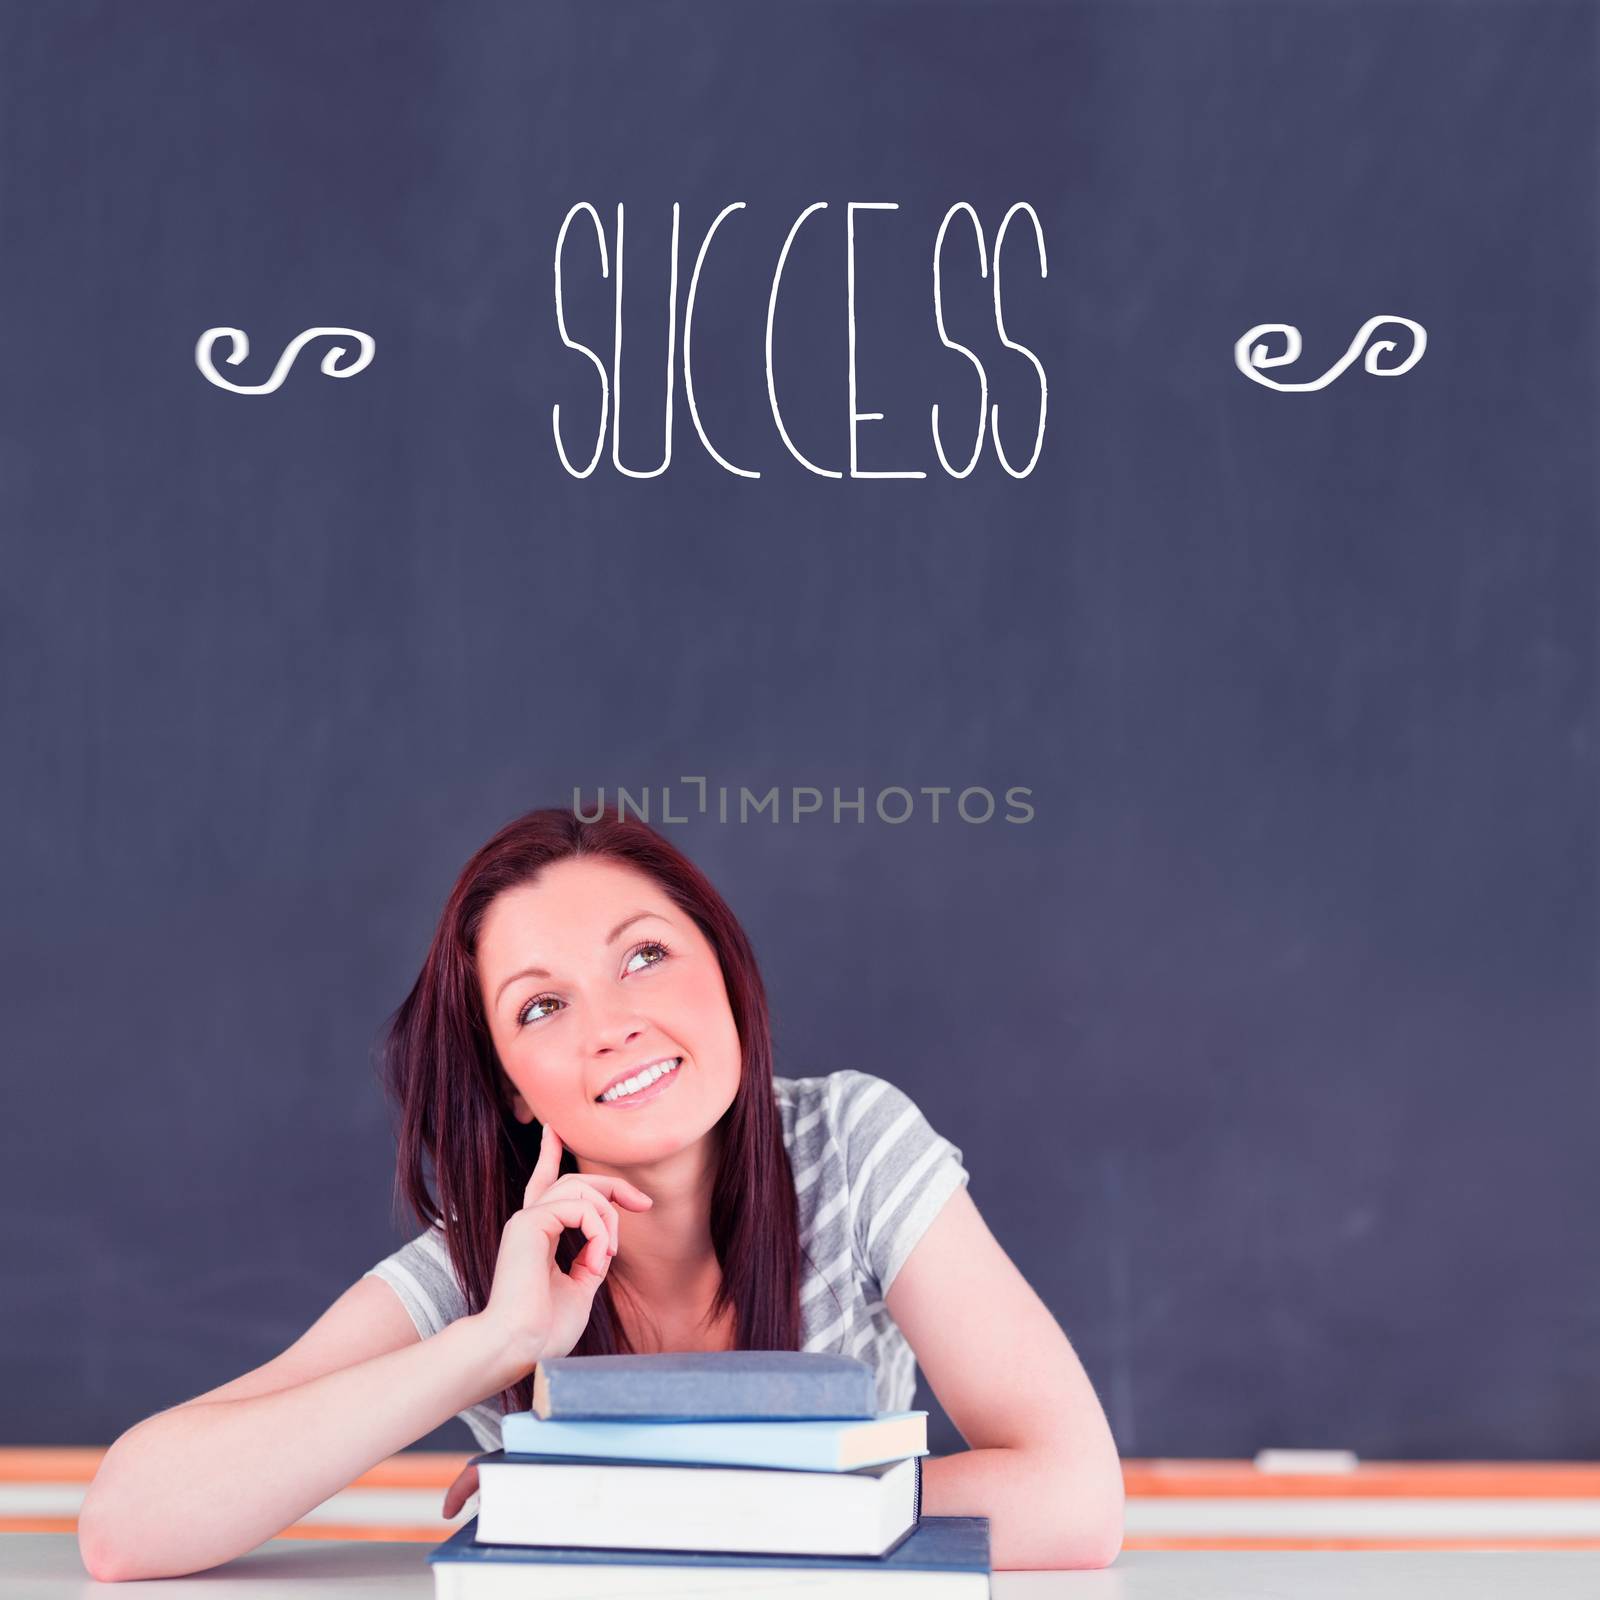 Success against student thinking in classroom by Wavebreakmedia